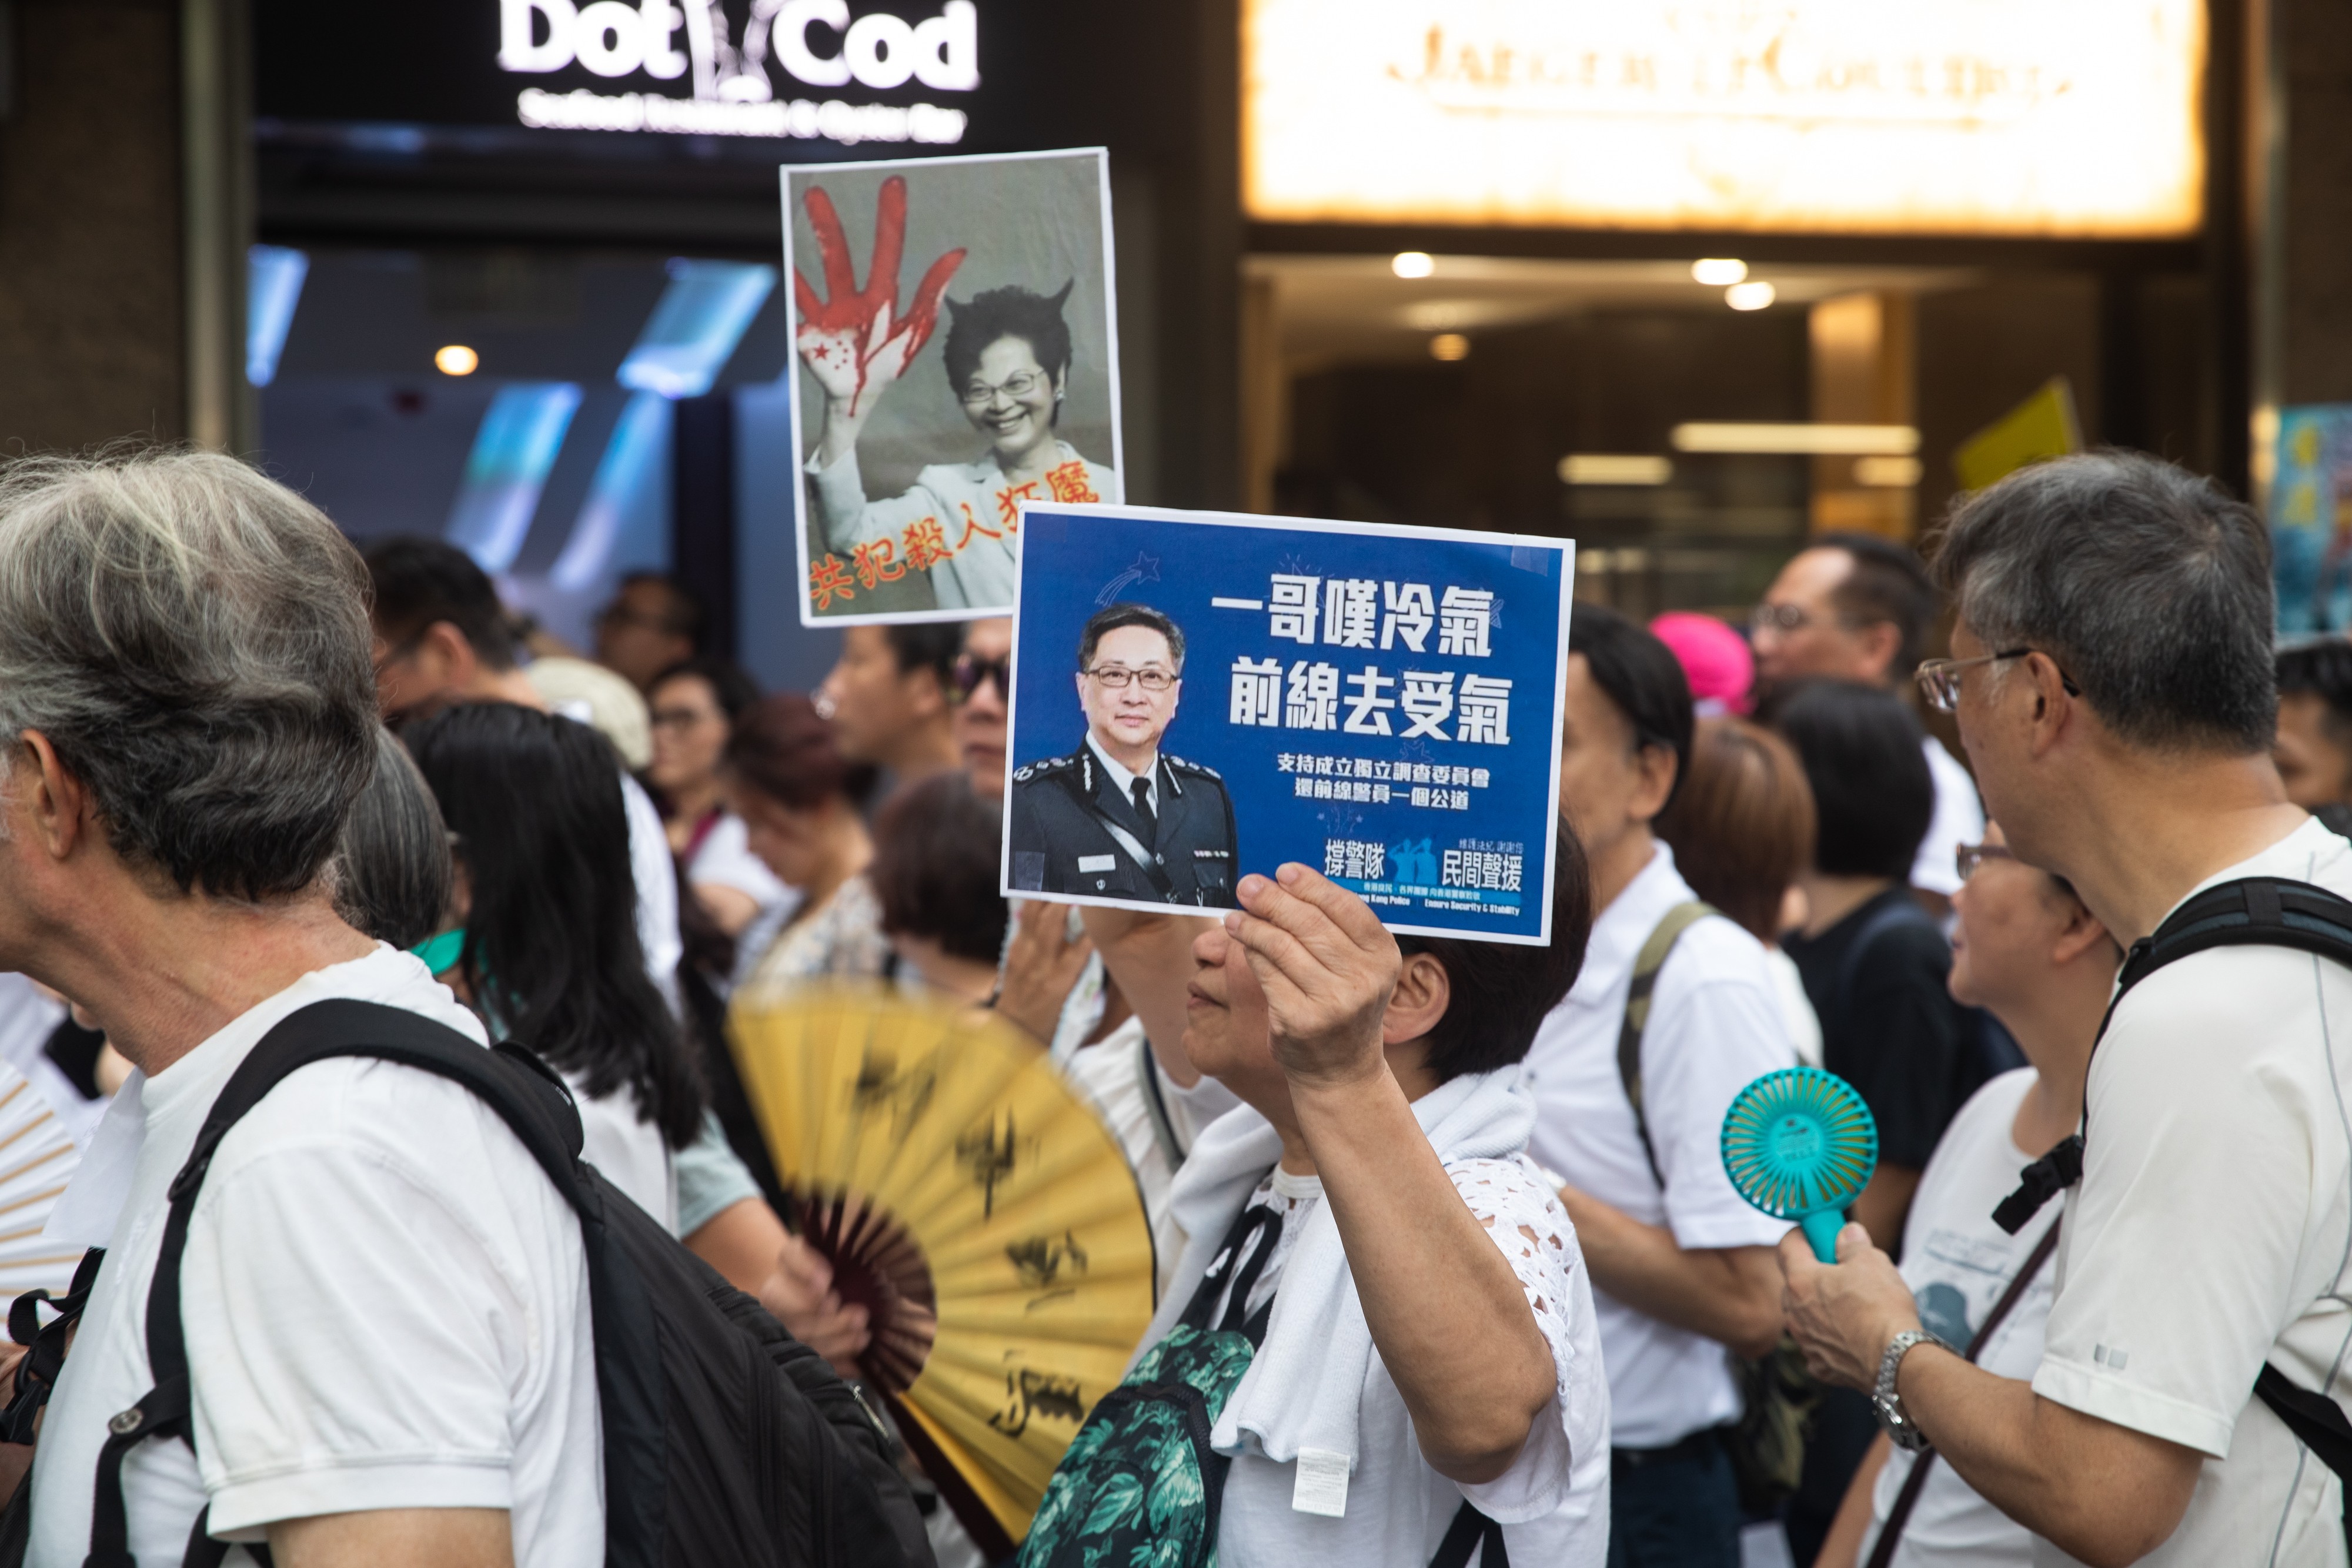 Elderly demonstrators hold signs rebuking Chief Executive Carrie Lam and police chief Stephen Lo during a protest in support of young protesters on July 17. Photo: Bloomberg